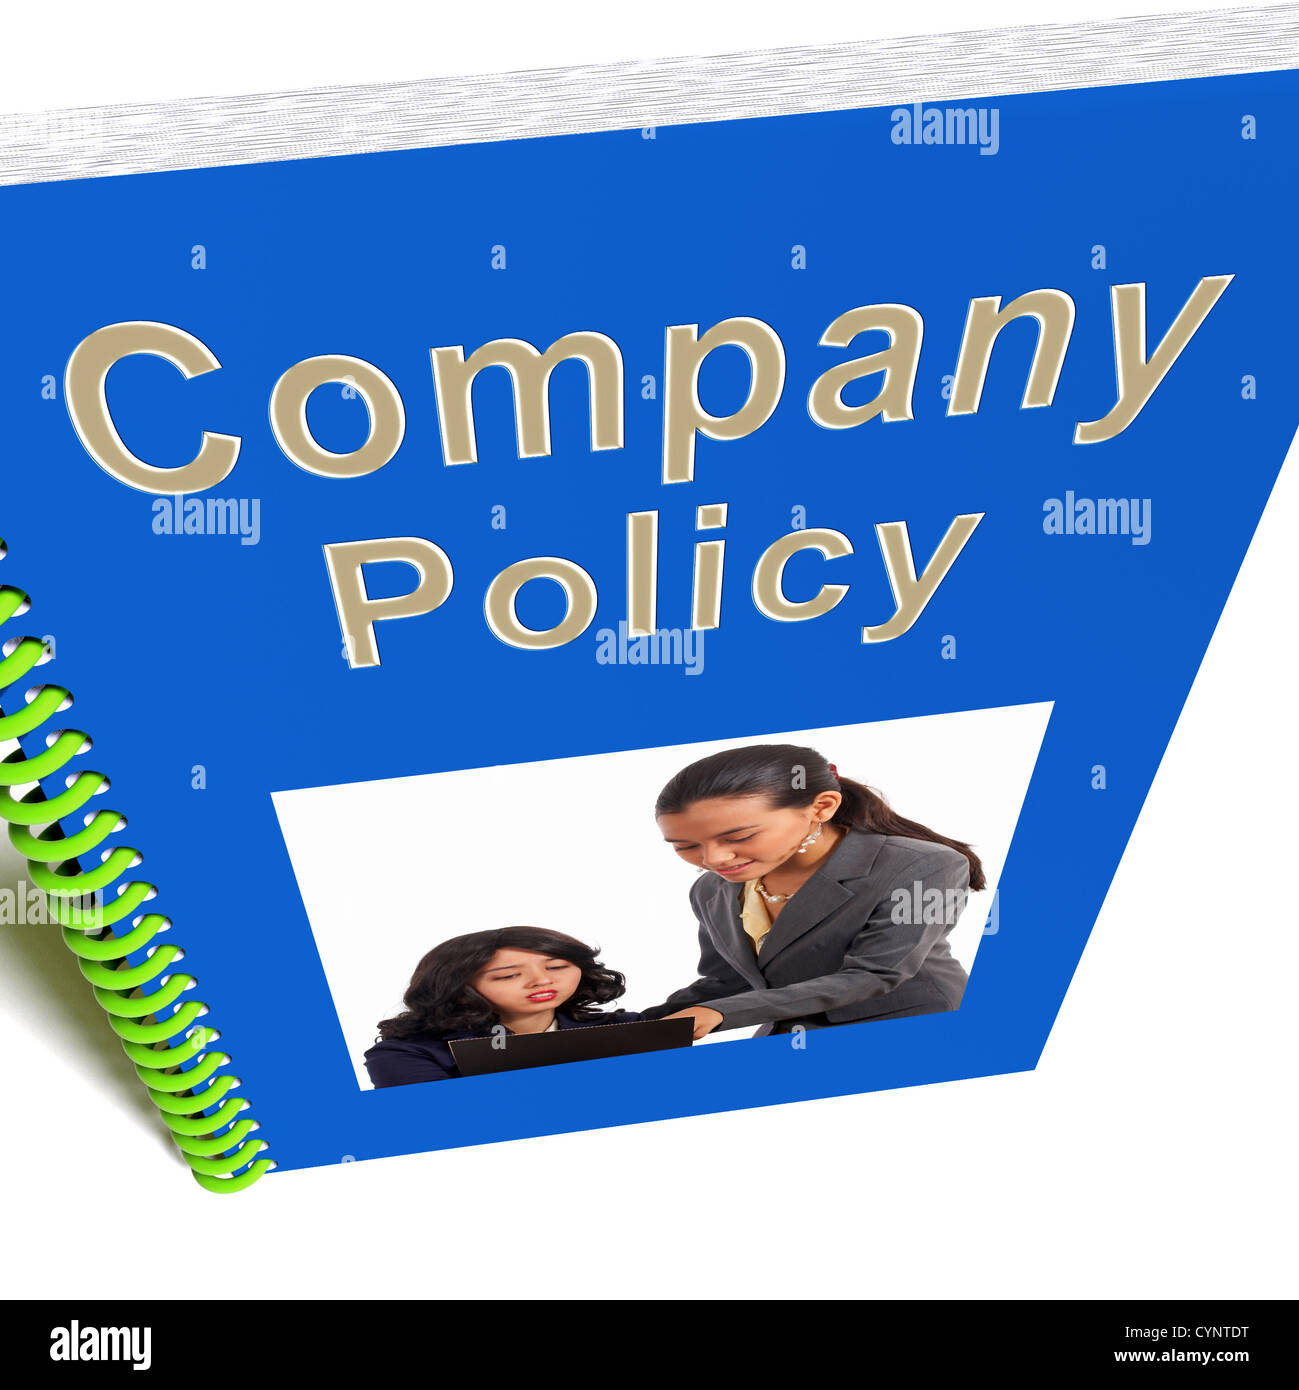 Company Policy Book Showing Rules For Employees Stock Photo